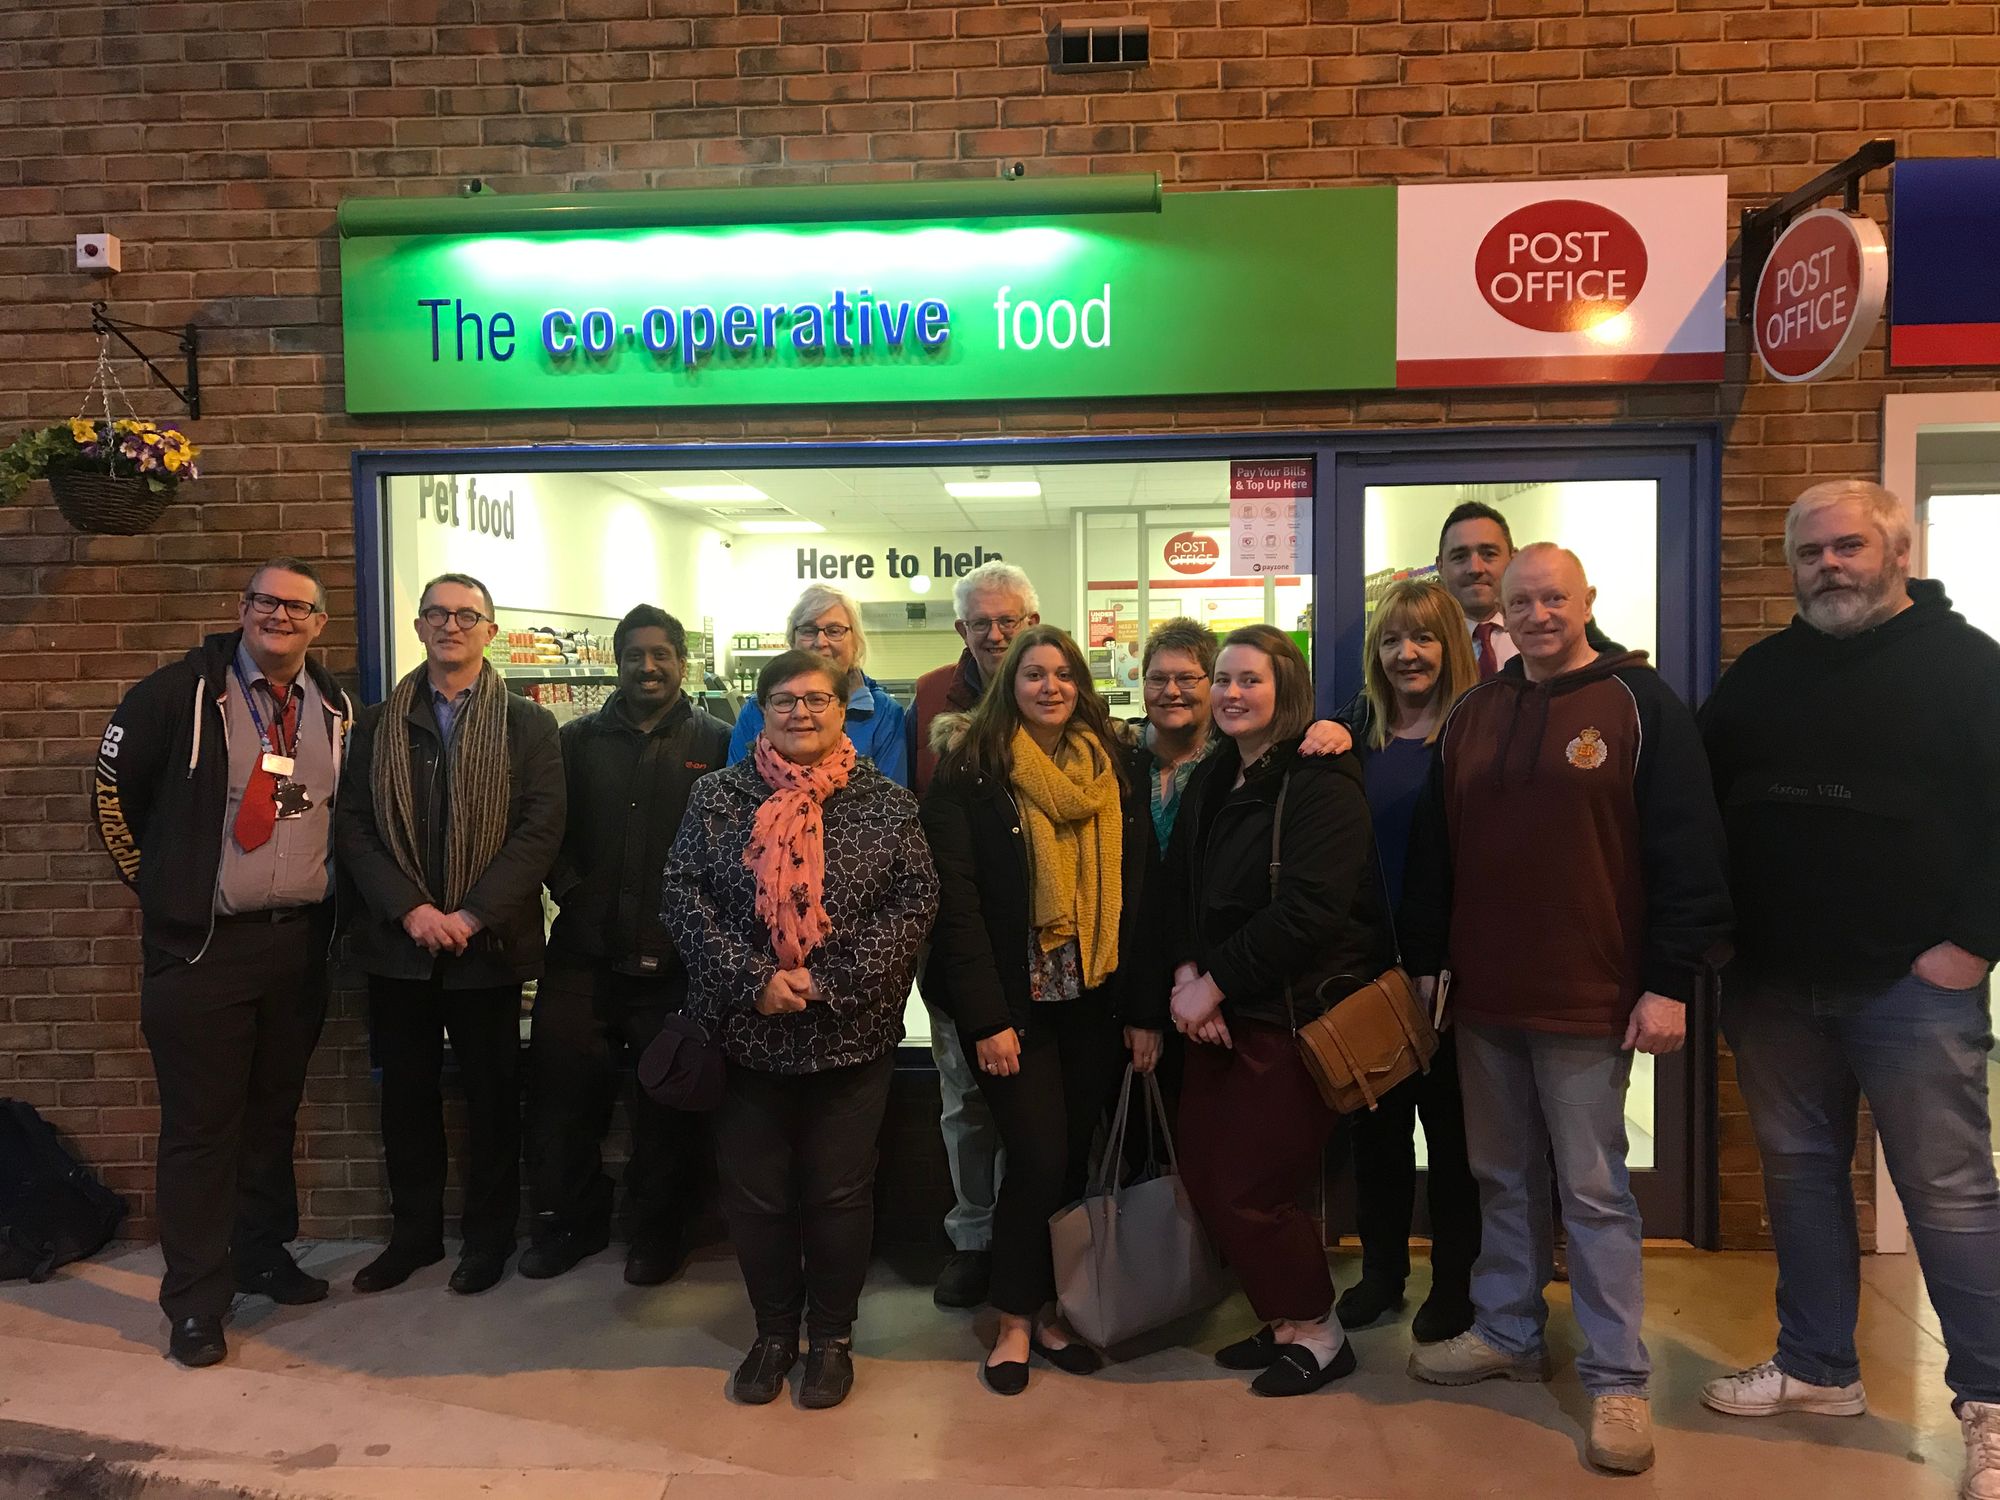 Elected Central England Co-operative Members meet in Birmingham